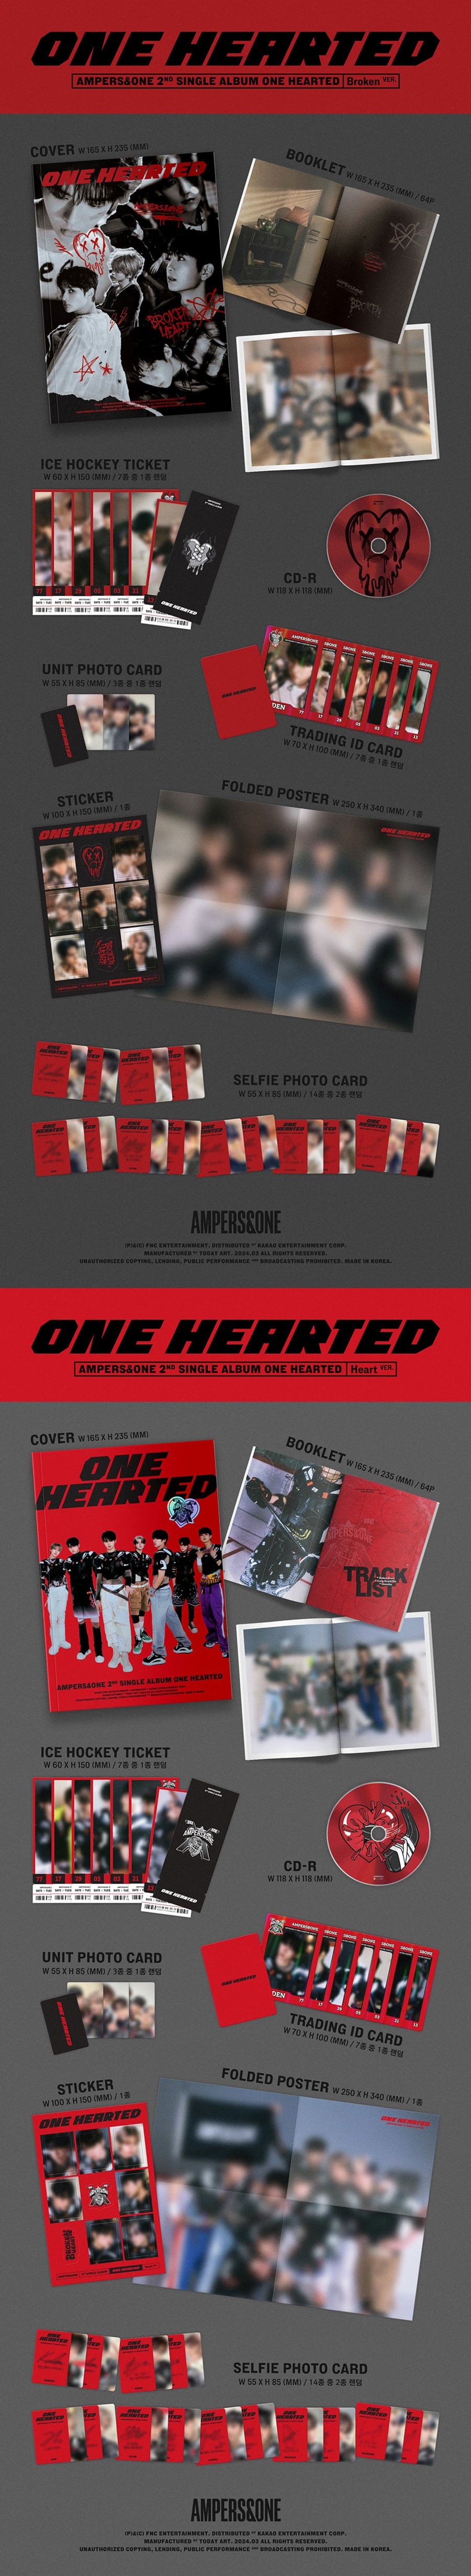 ampers-&-one-2nd-single-album-one-hearted-wholesales